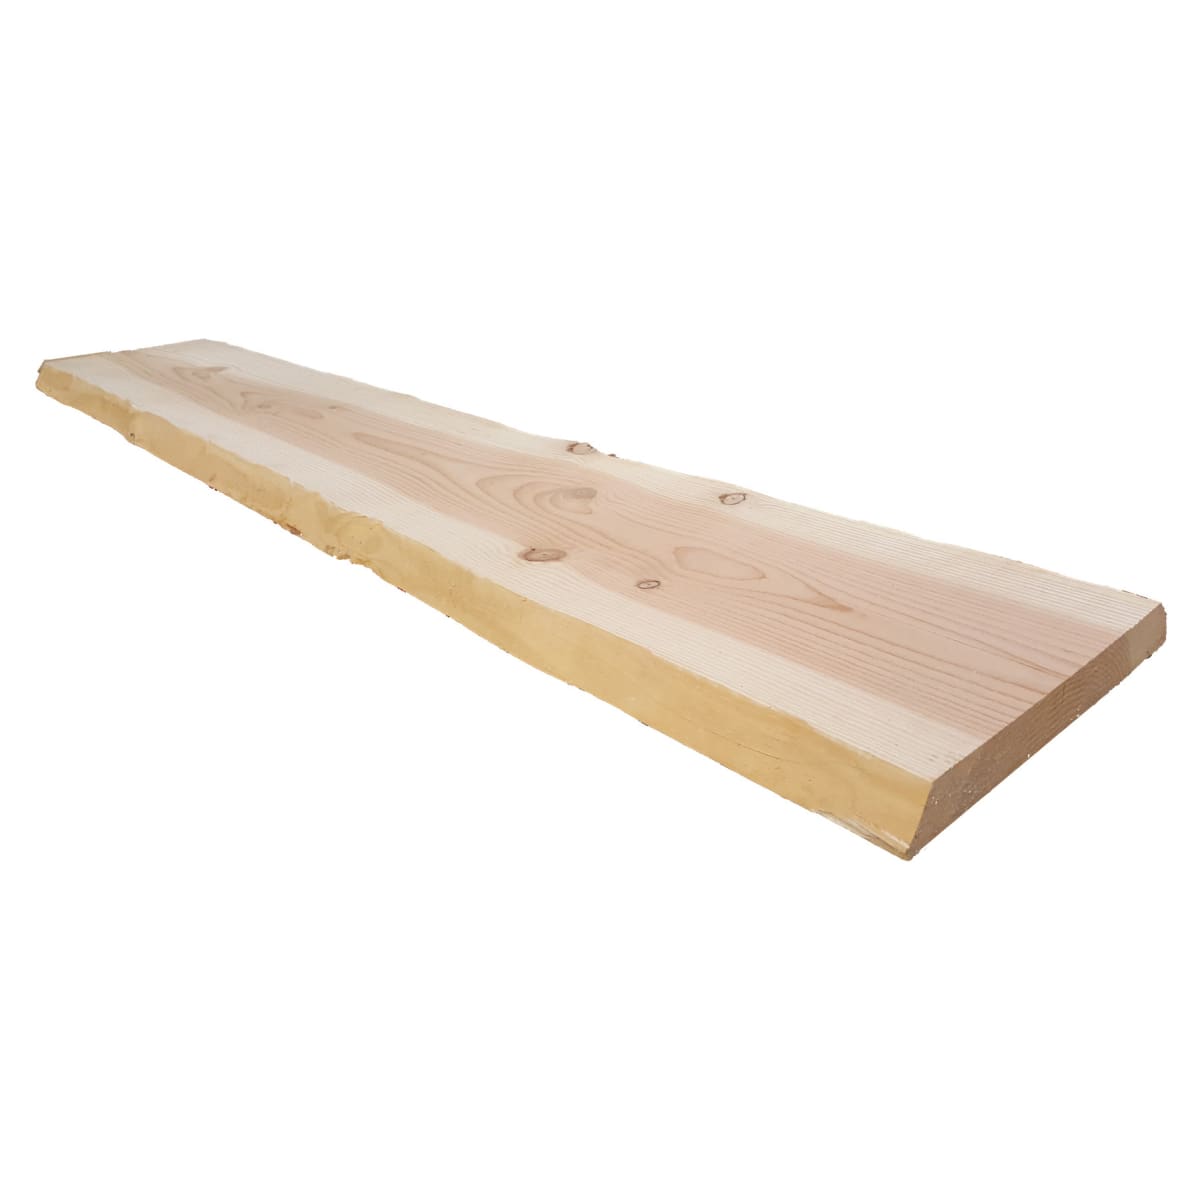 WOODEN BOARD 200X30/38 CM THICKNESS 50 MM